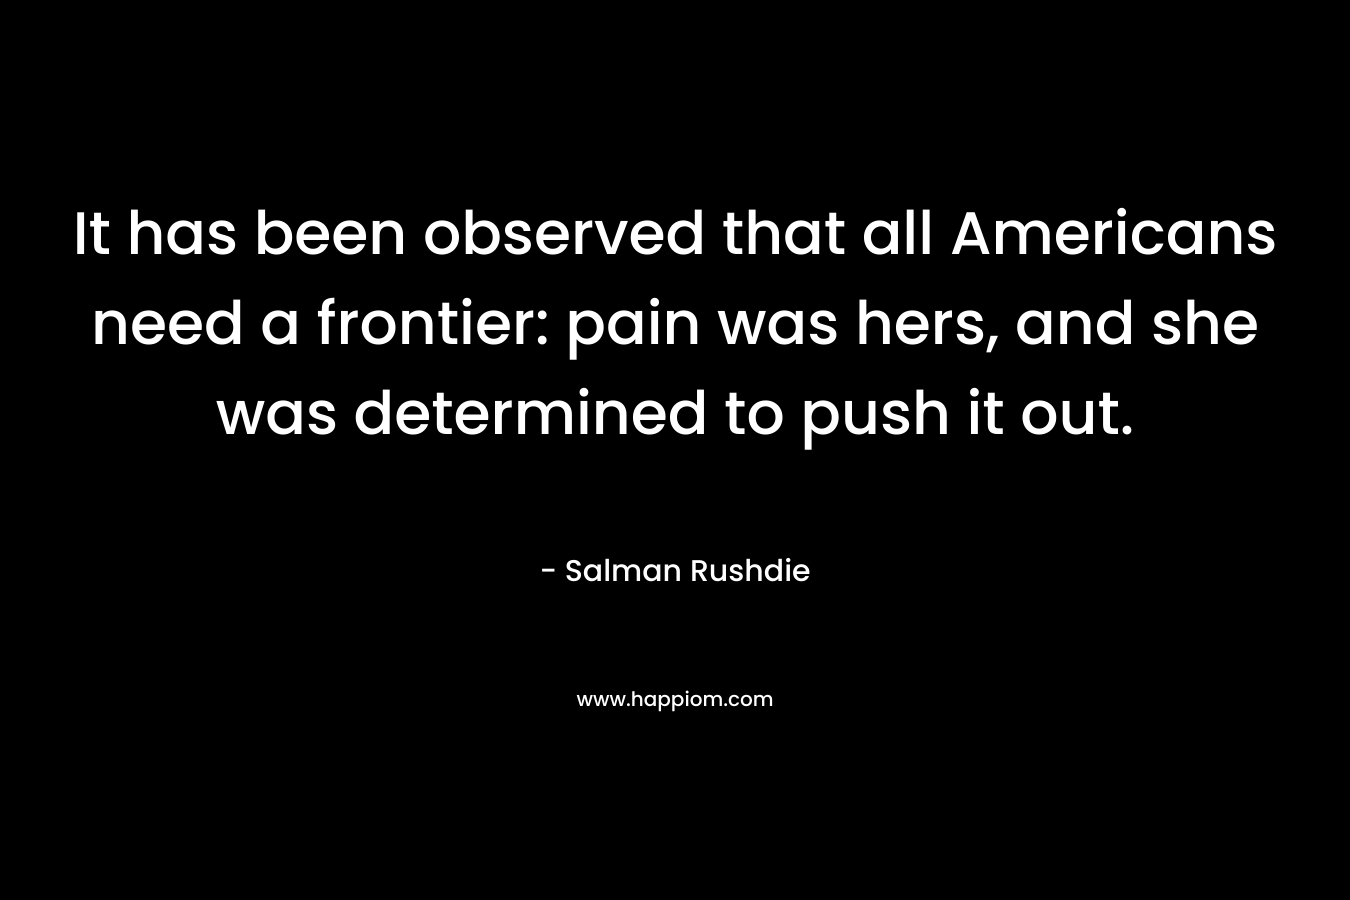 It has been observed that all Americans need a frontier: pain was hers, and she was determined to push it out.